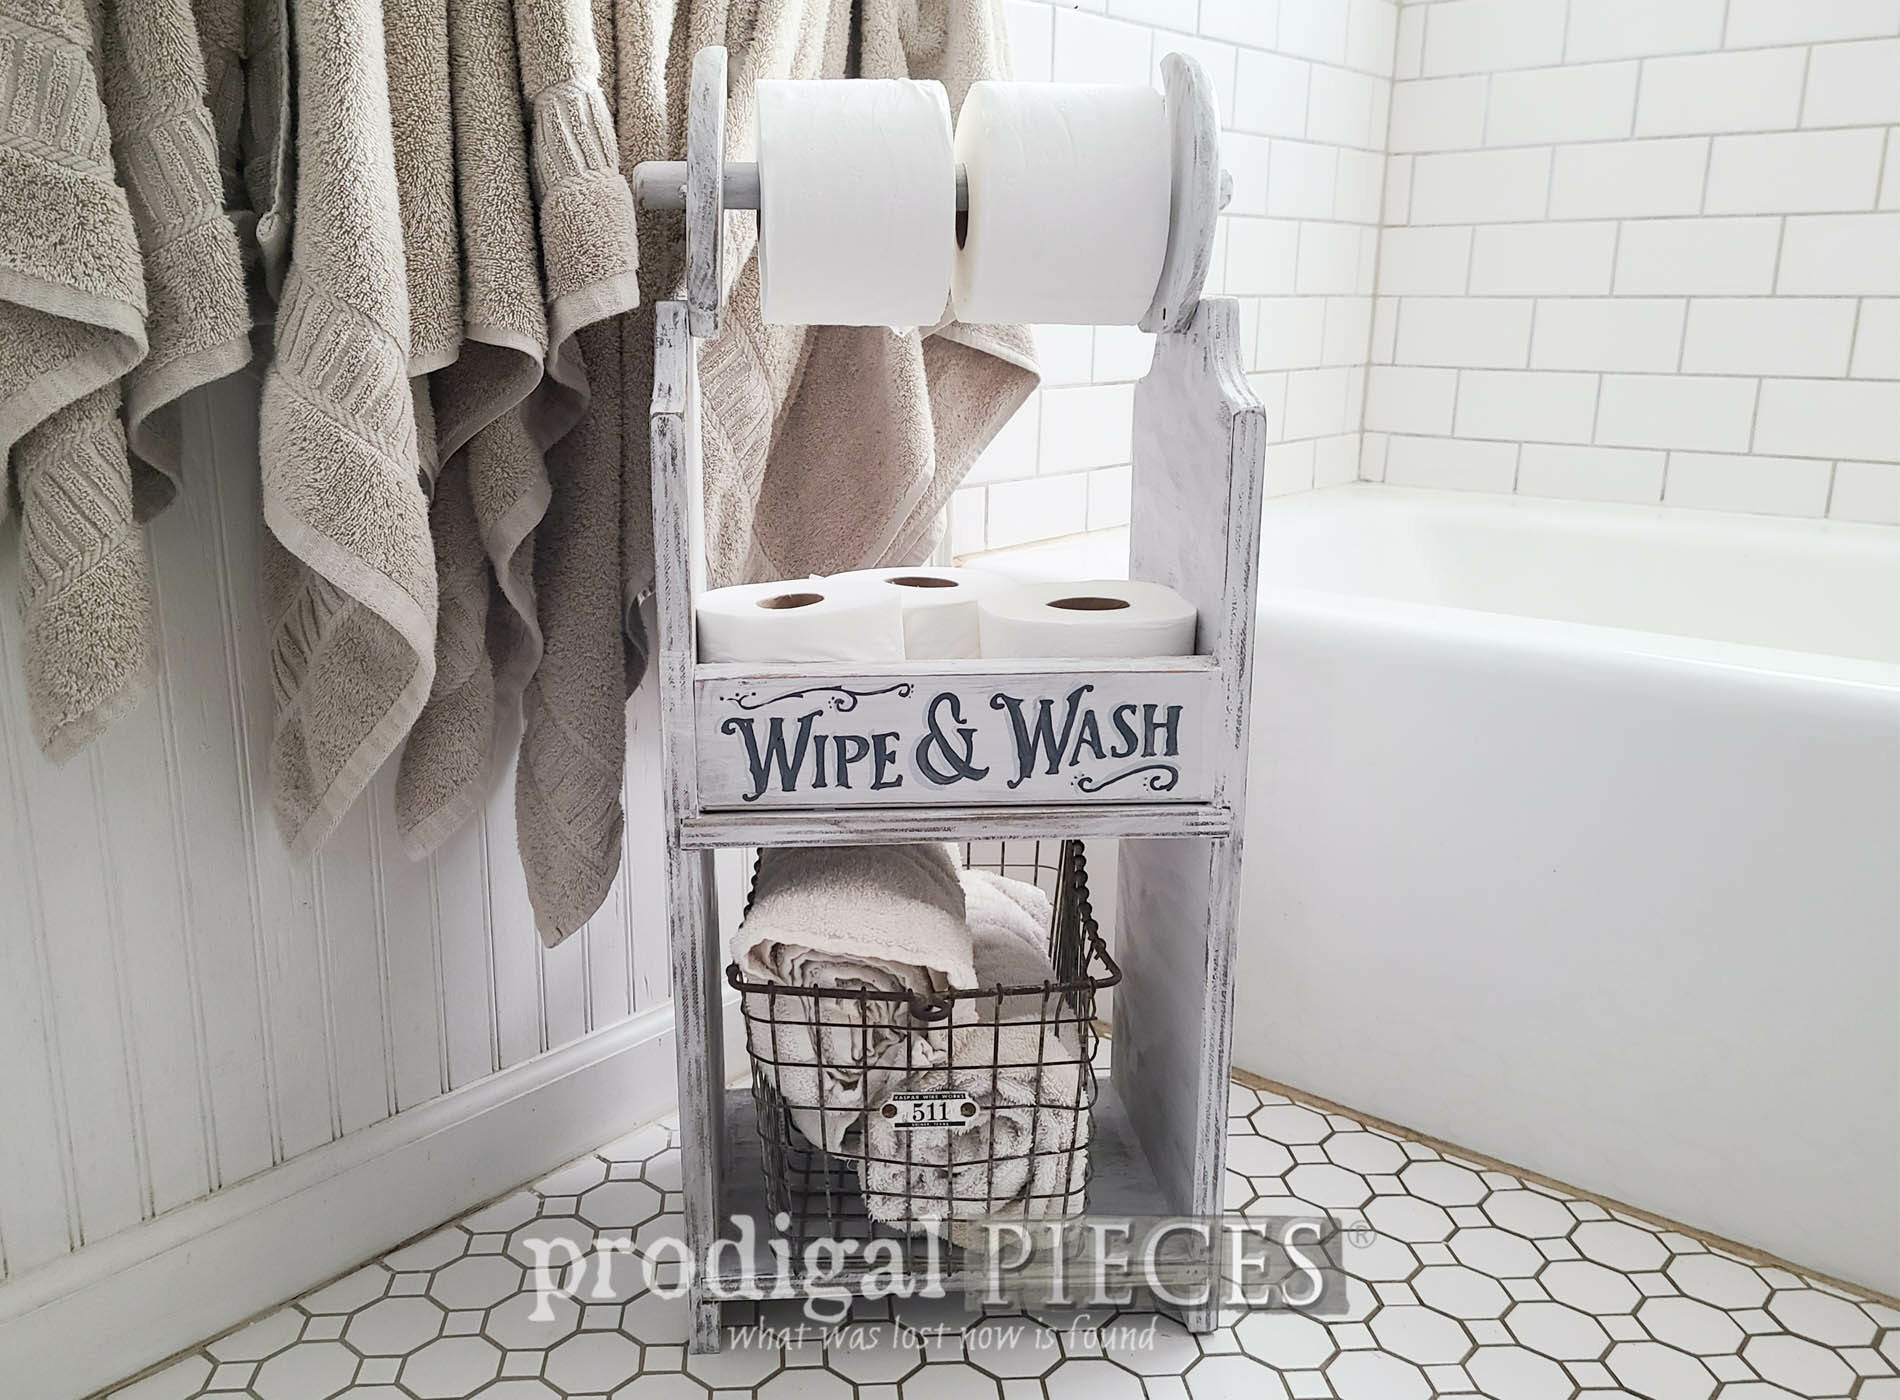 Featured Upcycled Paper Towel Holder into Toilet Paper Holder by Larissa of Prodigal Pieces | prodigalpieces.com #prodigalpieces #diy #upcycled #farmhouse